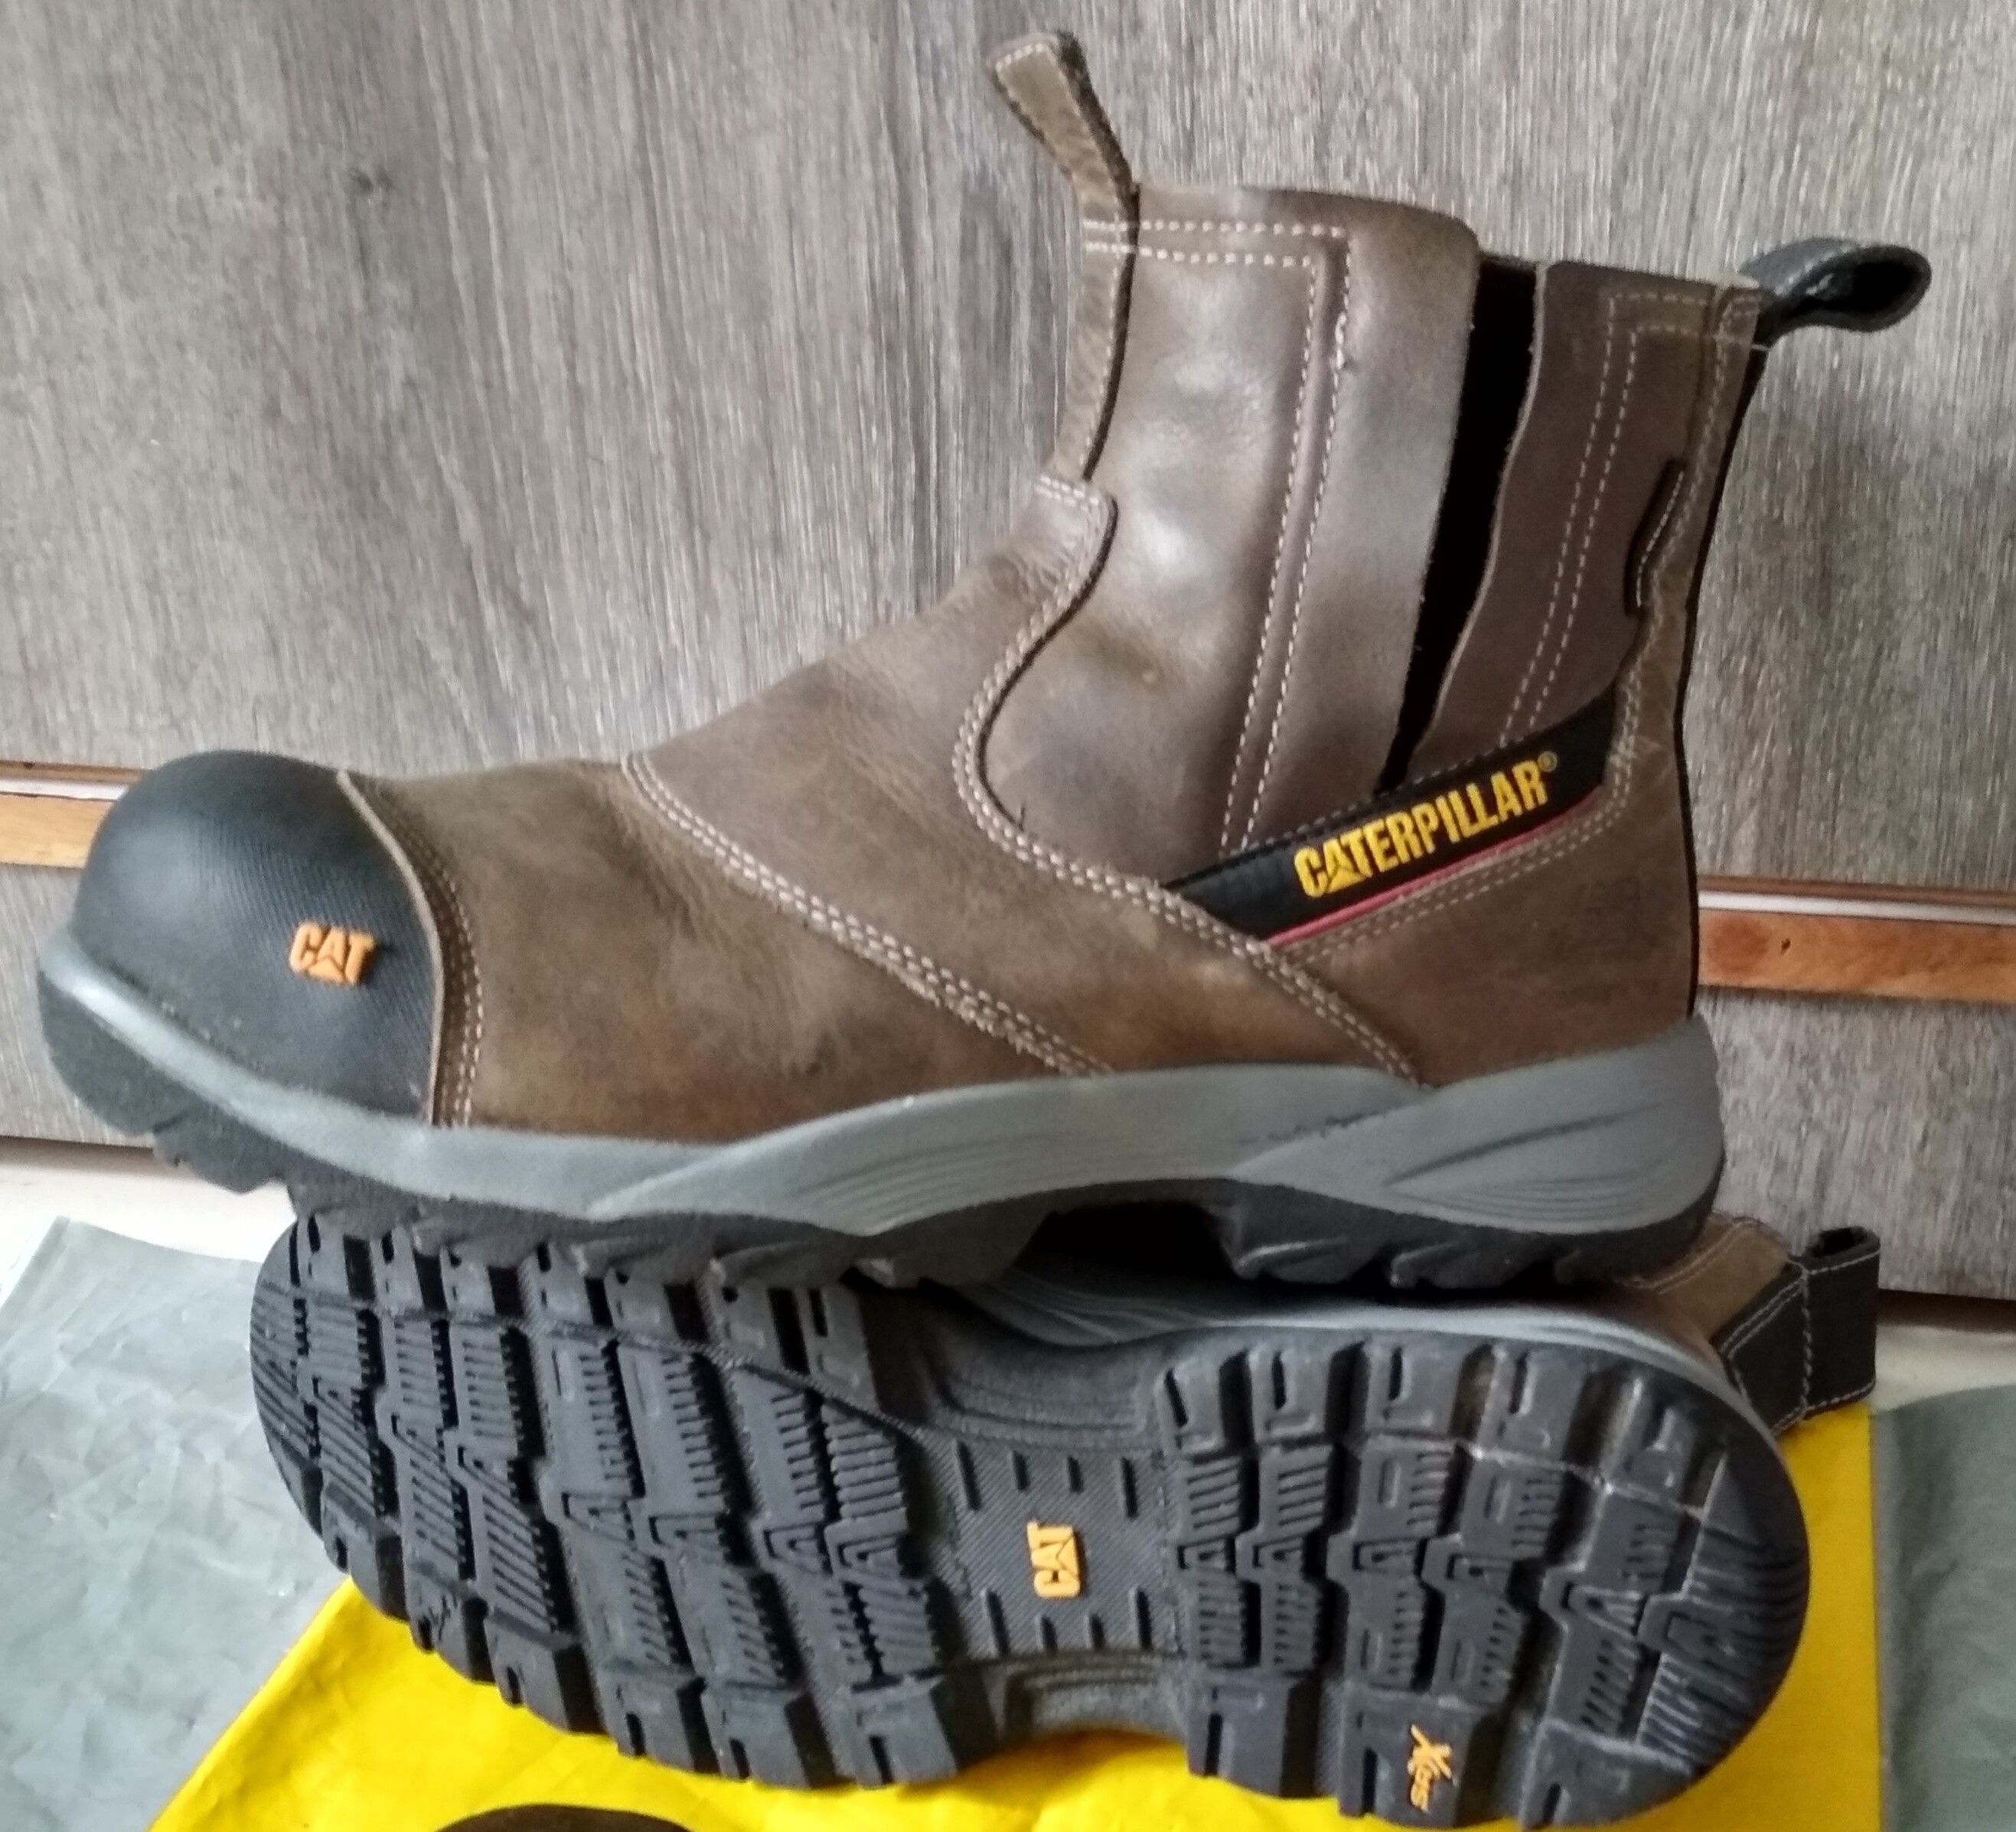 Caterpillar Cat Pull on waterproof Boots for Men's Size US 8 / EU 41 - 1 Preview